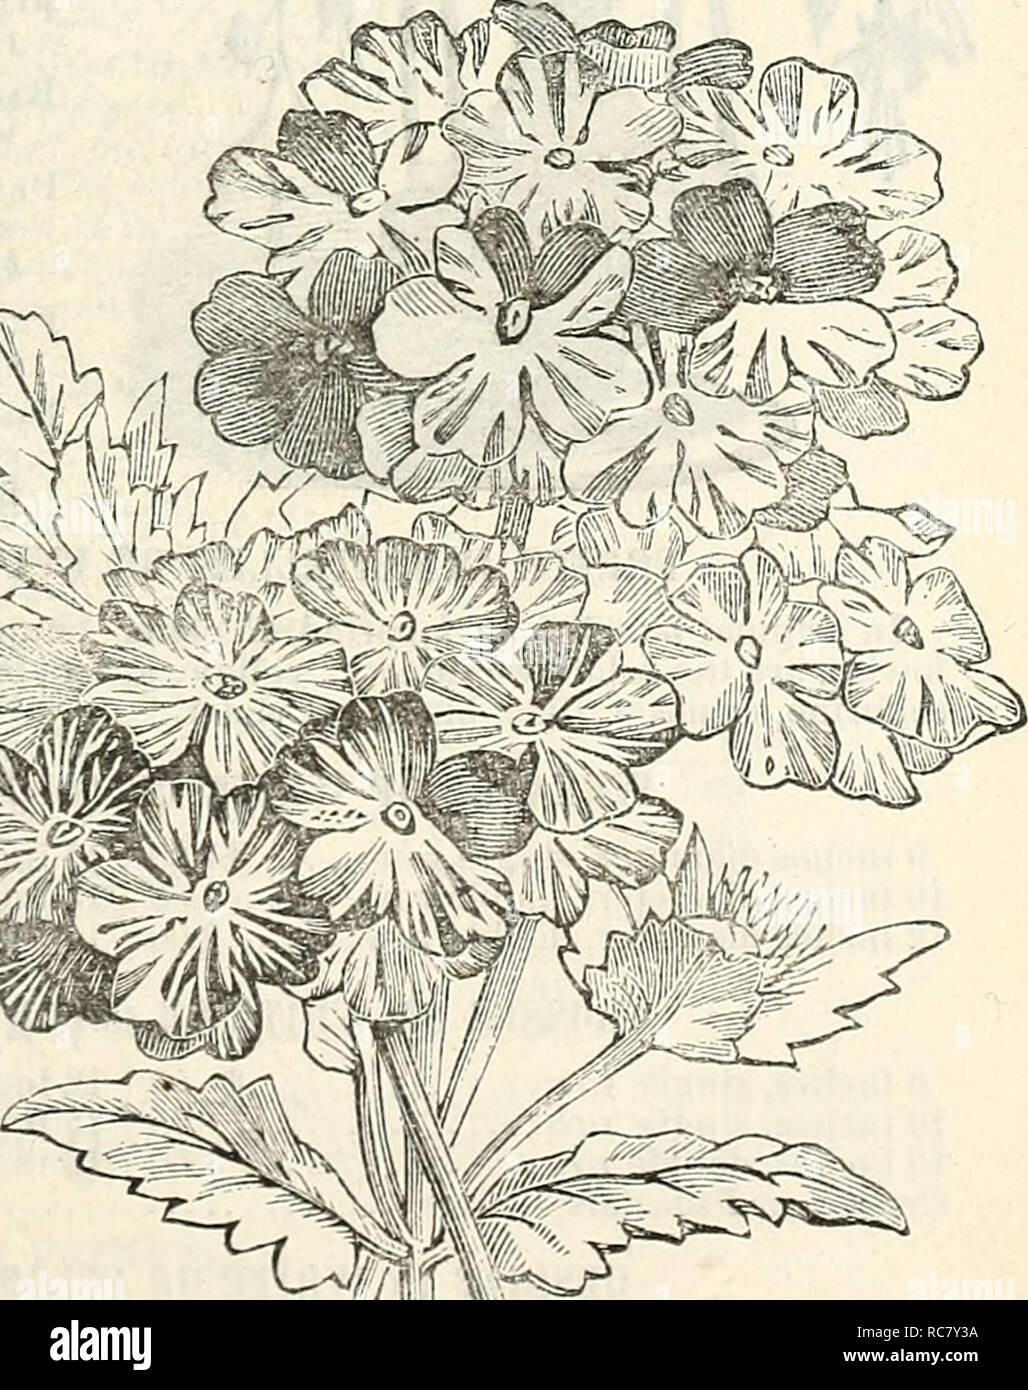 . Dreer's garden calendar : 1875. Seeds Catalogs; Nursery stock Catalogs; Gardening Catalogs; Flowers Seeds Catalogs. Dreer''s Garden Calendar. ^o Per packft. PHLOX DRUMMONDI HEYNOLDI CARDINALIS. A new dwarf variety, with large beautiful deep-scarlet flowers 20 Dkummondi, New Peach-blossom. A new charming dwarf variety of compact growth. Flowers large and distinct, of a delicate salmon tint 20 POKTULACA ALBA OCULATA. A new variety of this ])opular plant. The flowers are large pure white, with reddish pur])le centre and red stalks 10 RICINUS, DUCHESS OF EDINBUKGH. A bronze-leaved vari- ety from Stock Photo